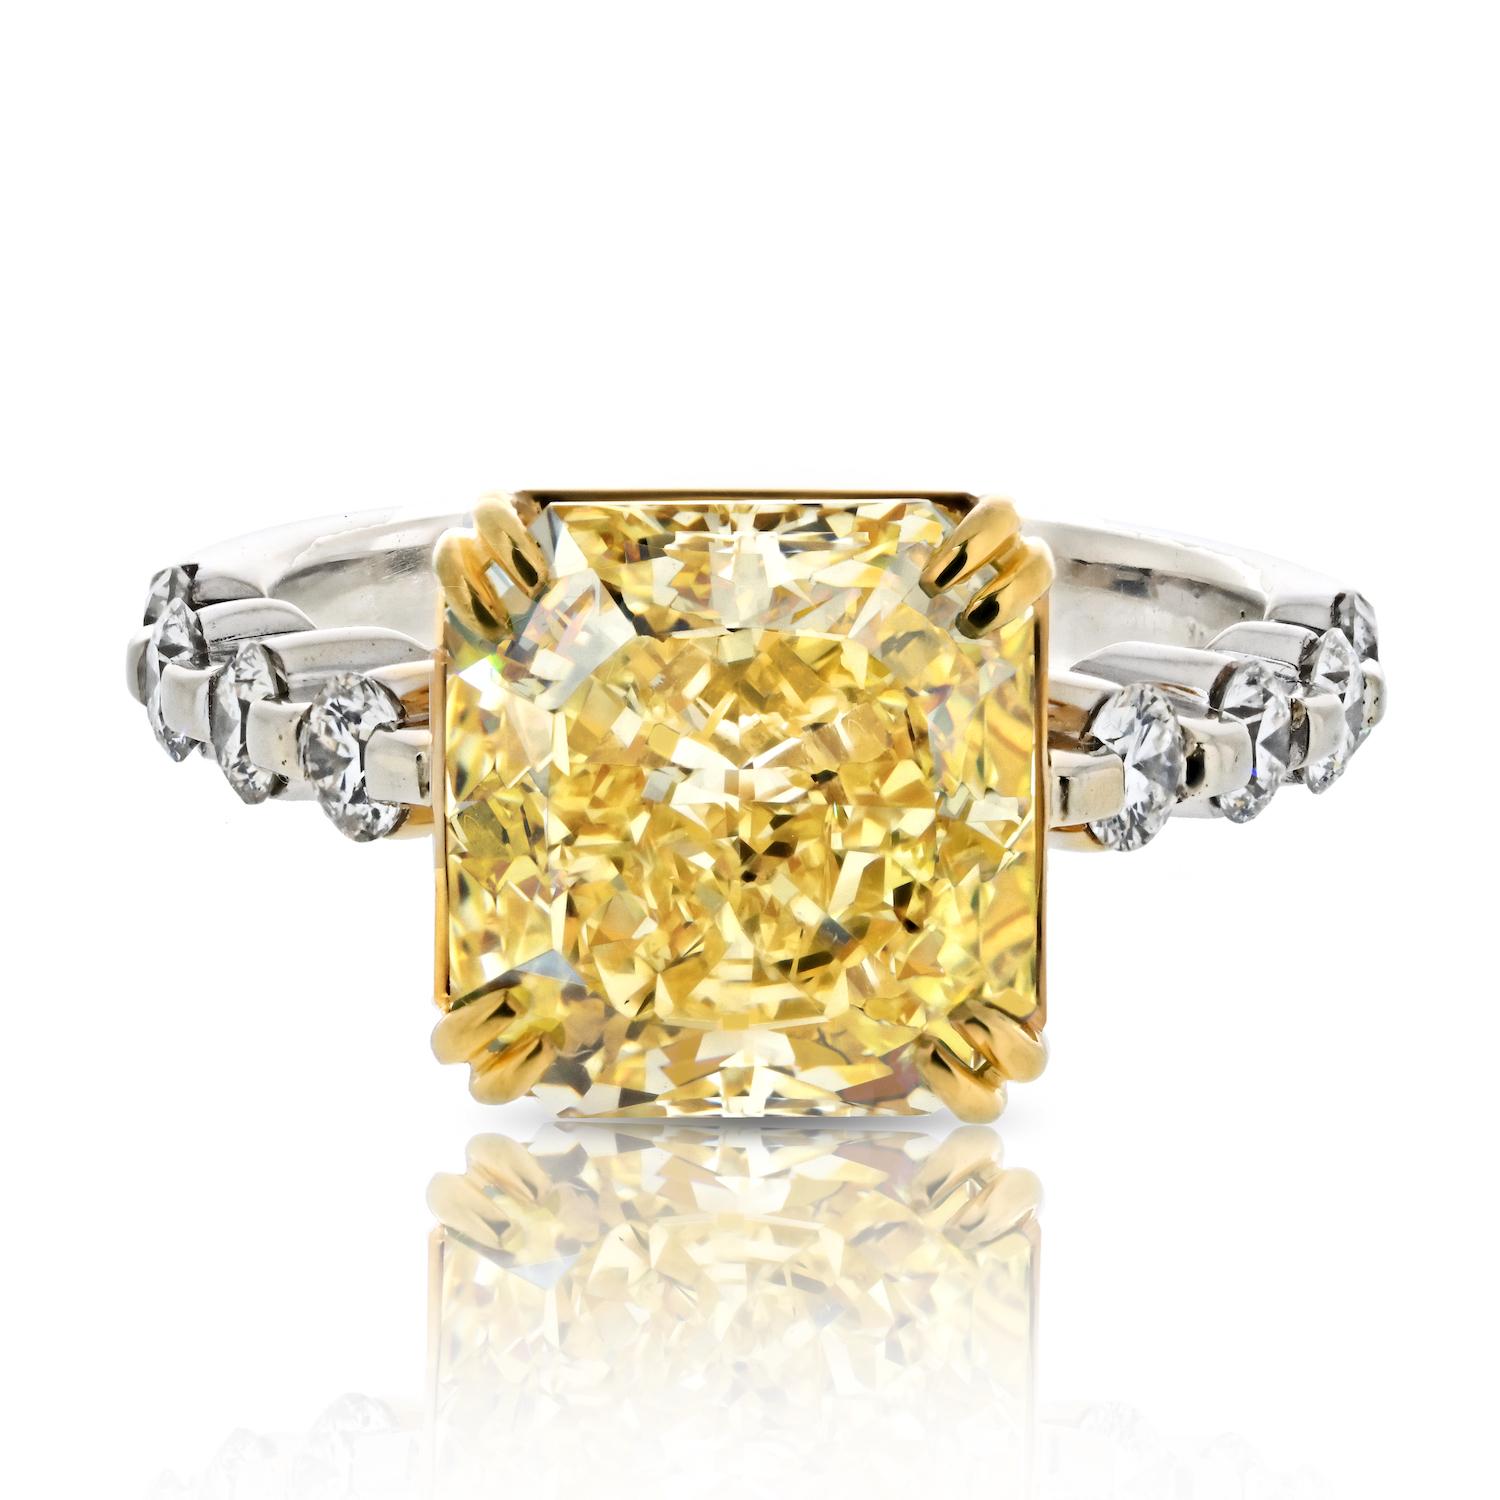 Elevate your love story with this mesmerizing 3.62-carat Radiant Cut Diamond Fancy Intense Yellow GIA-certified engagement ring. The center diamond, a dazzling focal point, boasts a rare Fancy Intense Yellow hue that exudes warmth and vibrancy. What